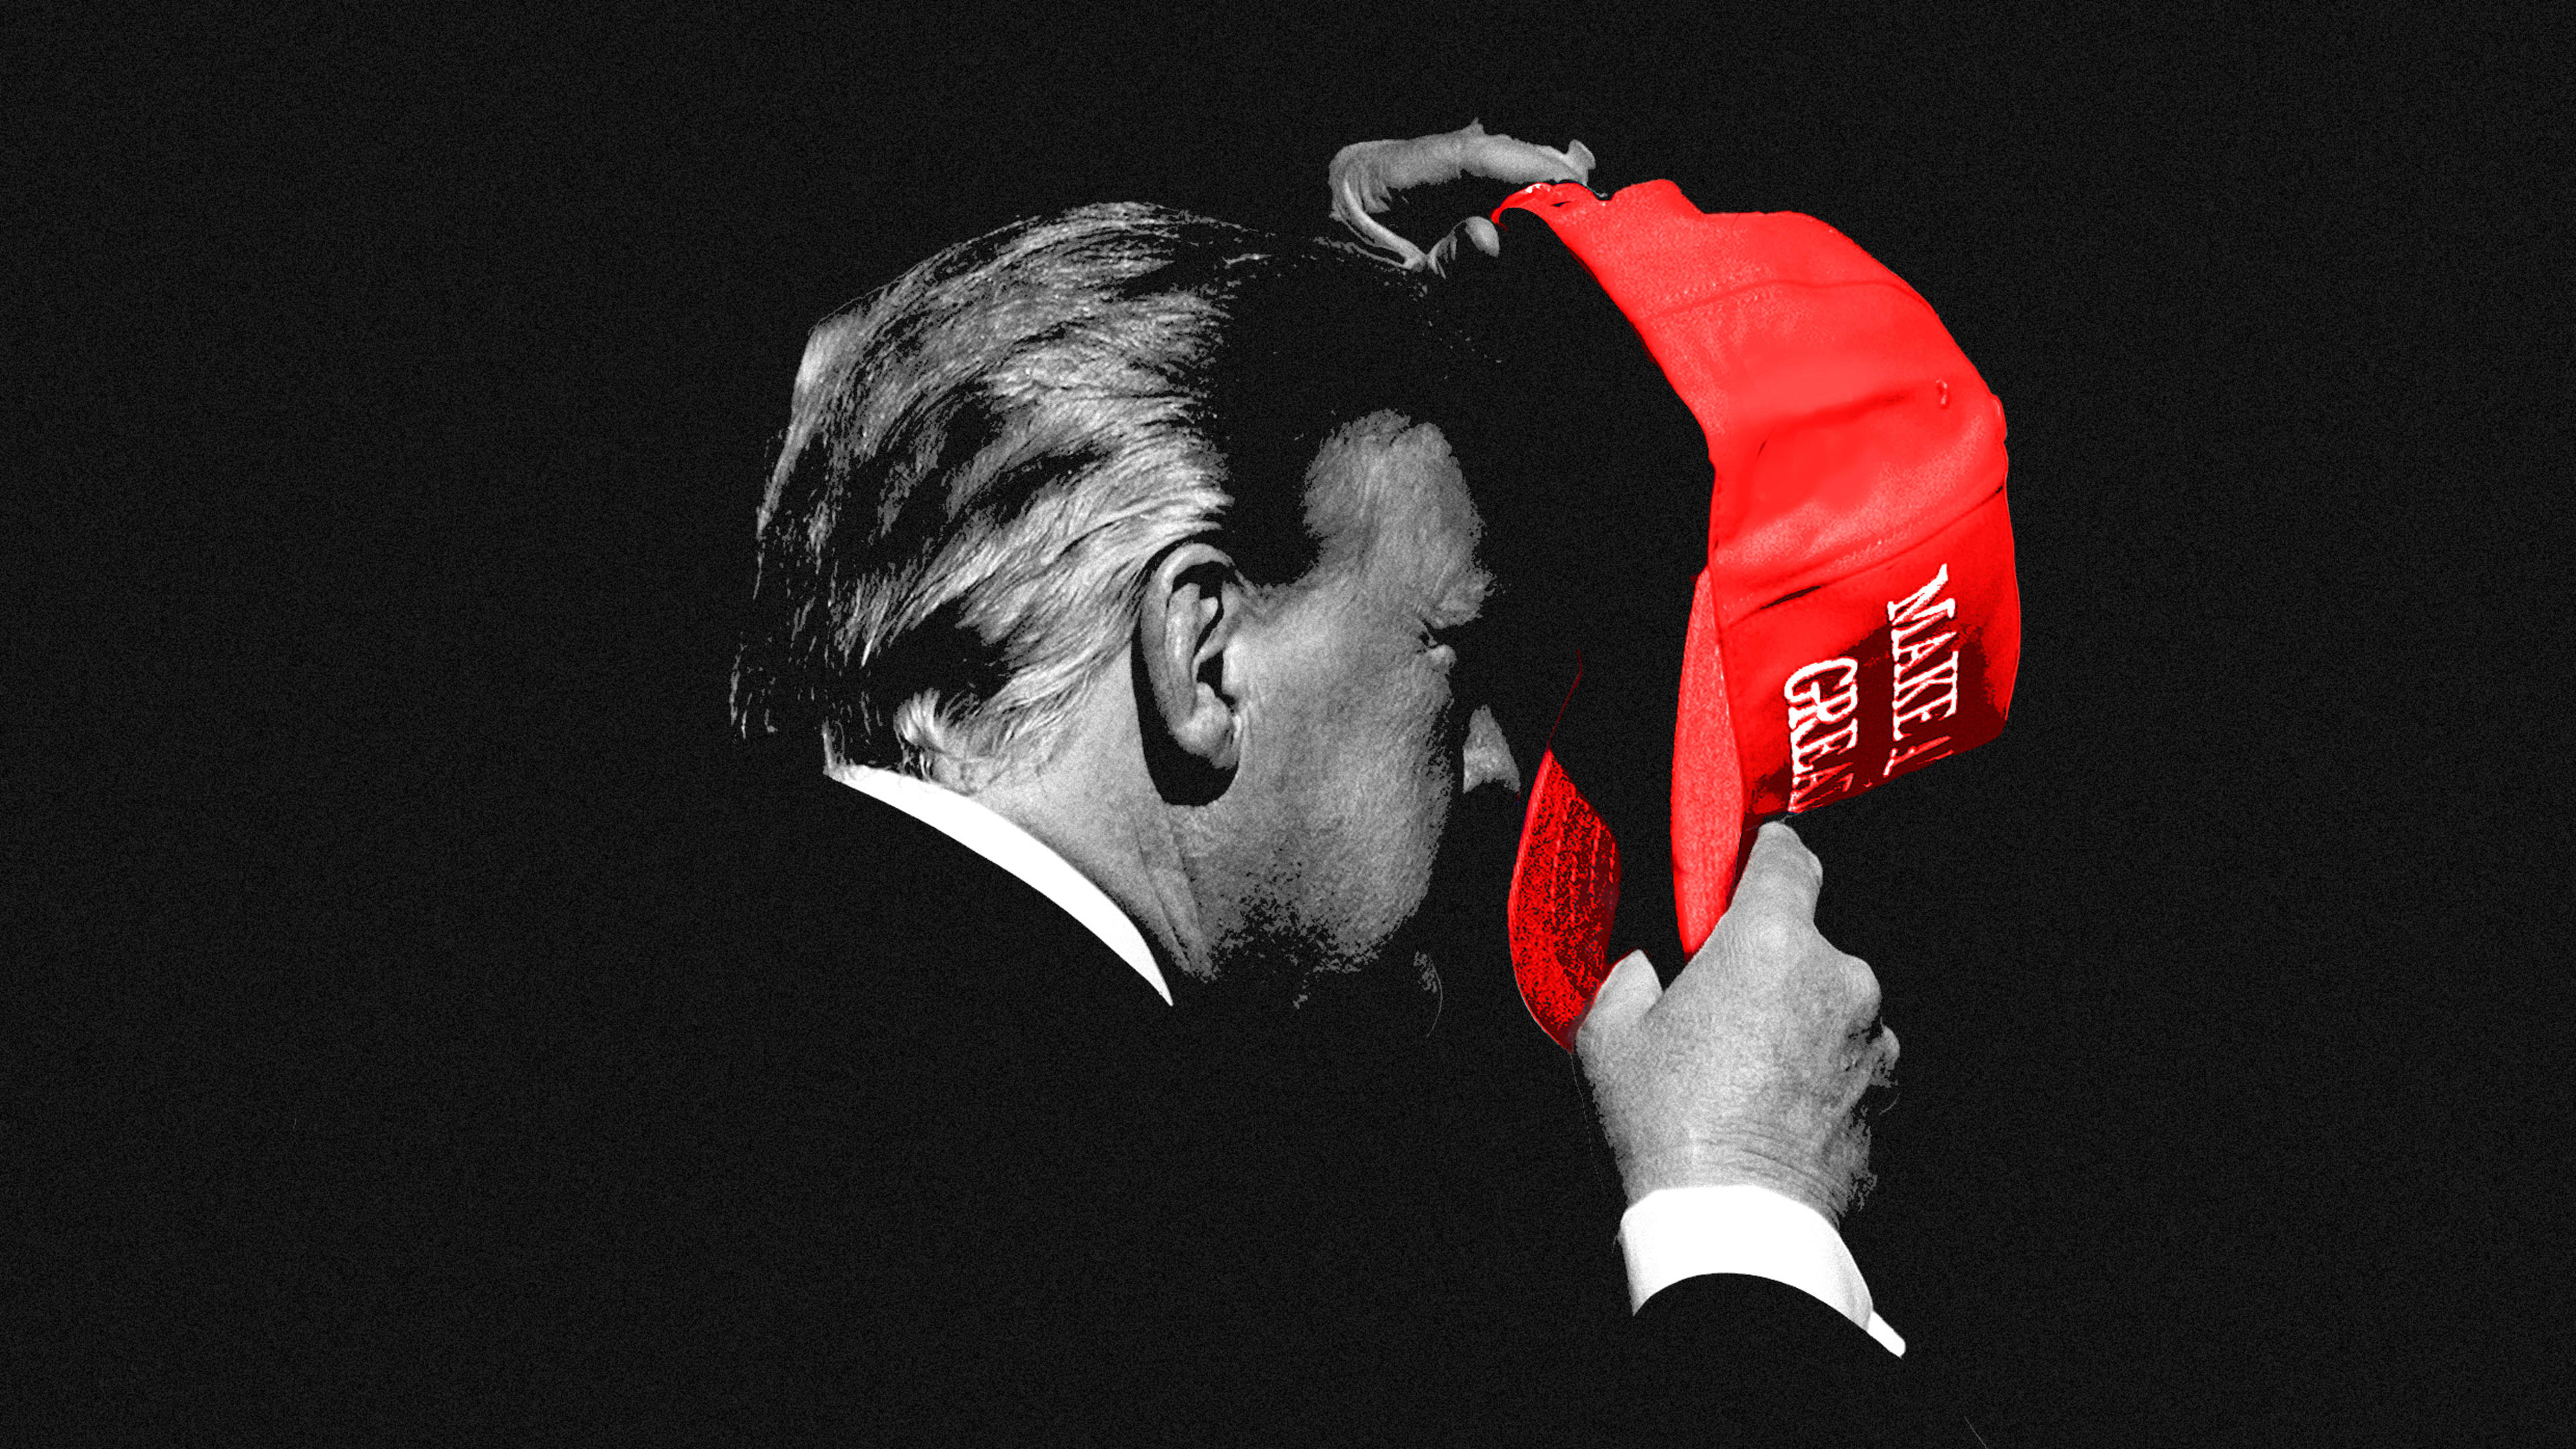 How Trump gave rise to the aesthetics of hate